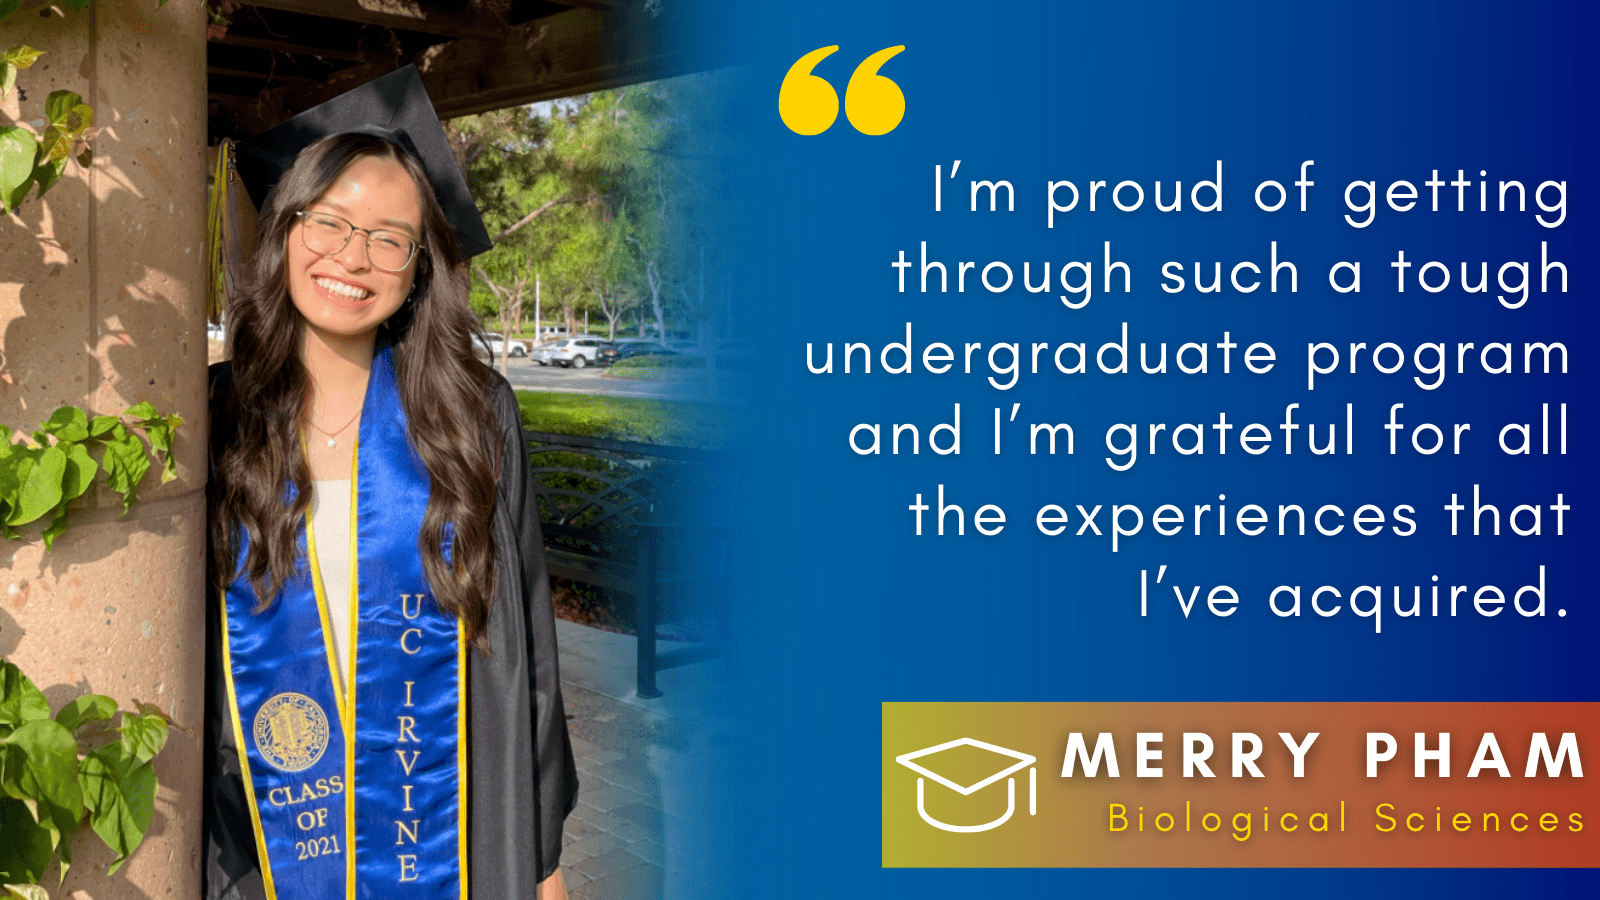 Image of Merry Pham with her quote.